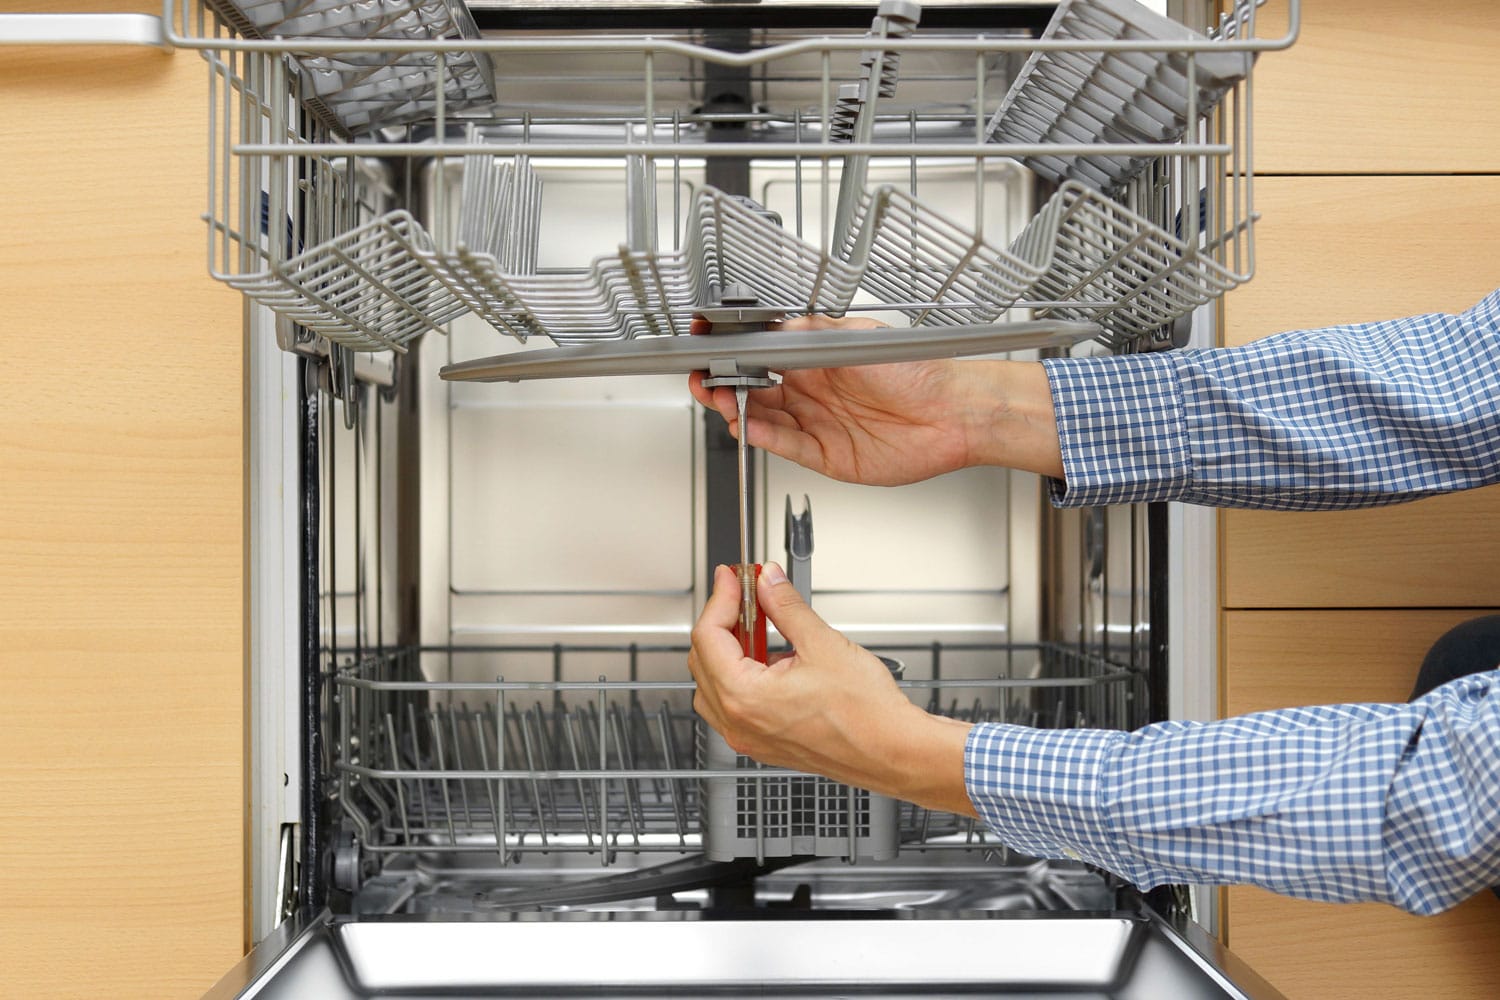 Worker installing a new dishwasher